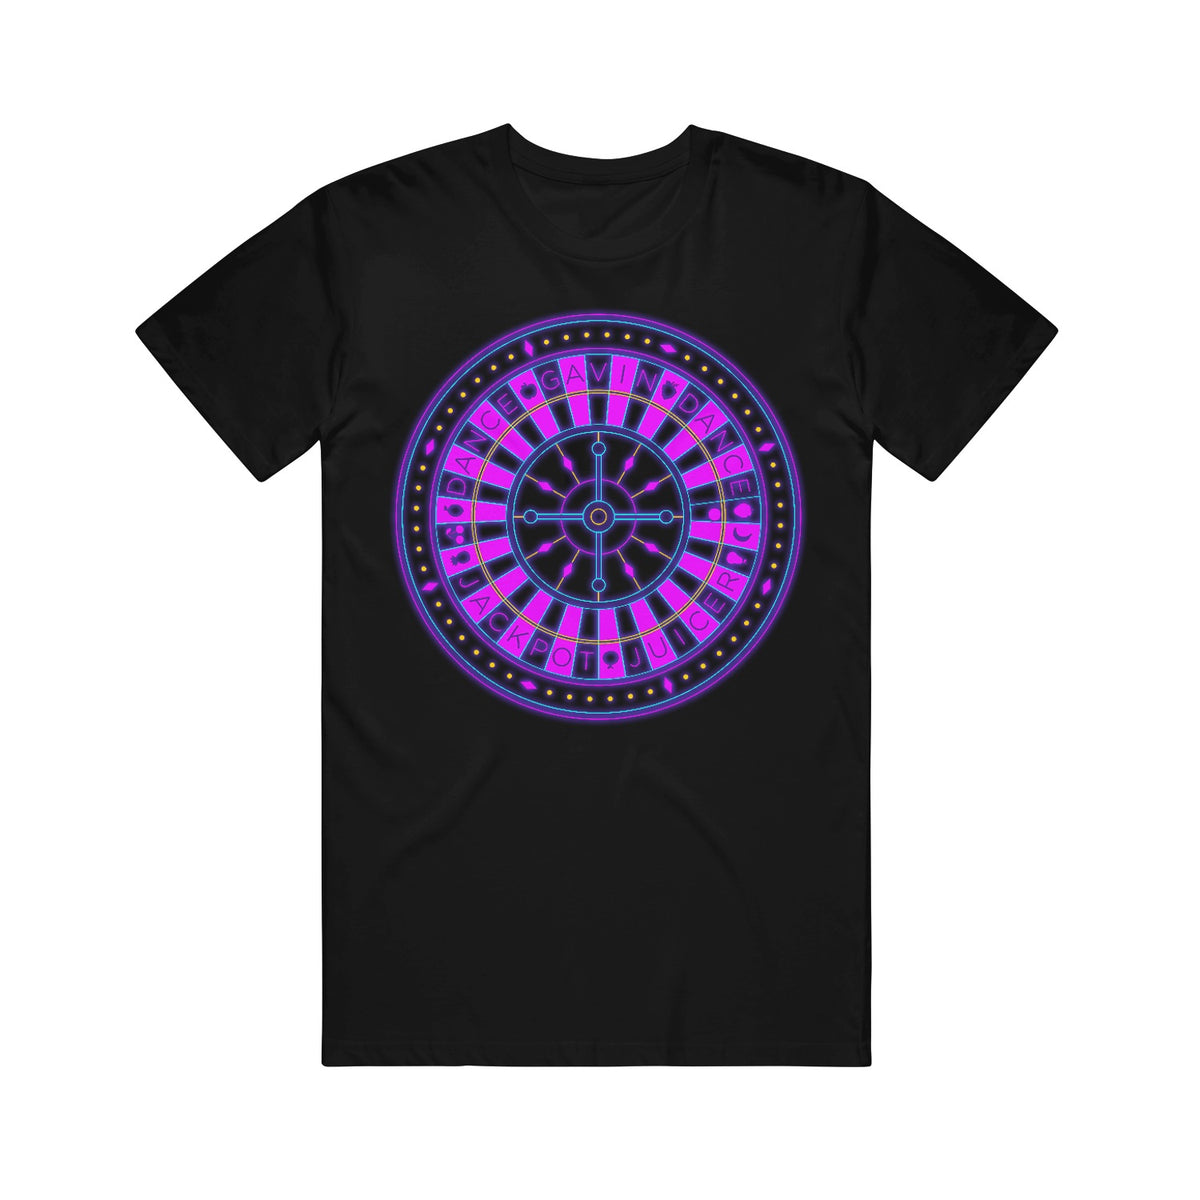 image of a black tee shirt on a white background. tee has full body print of a roulette wheel